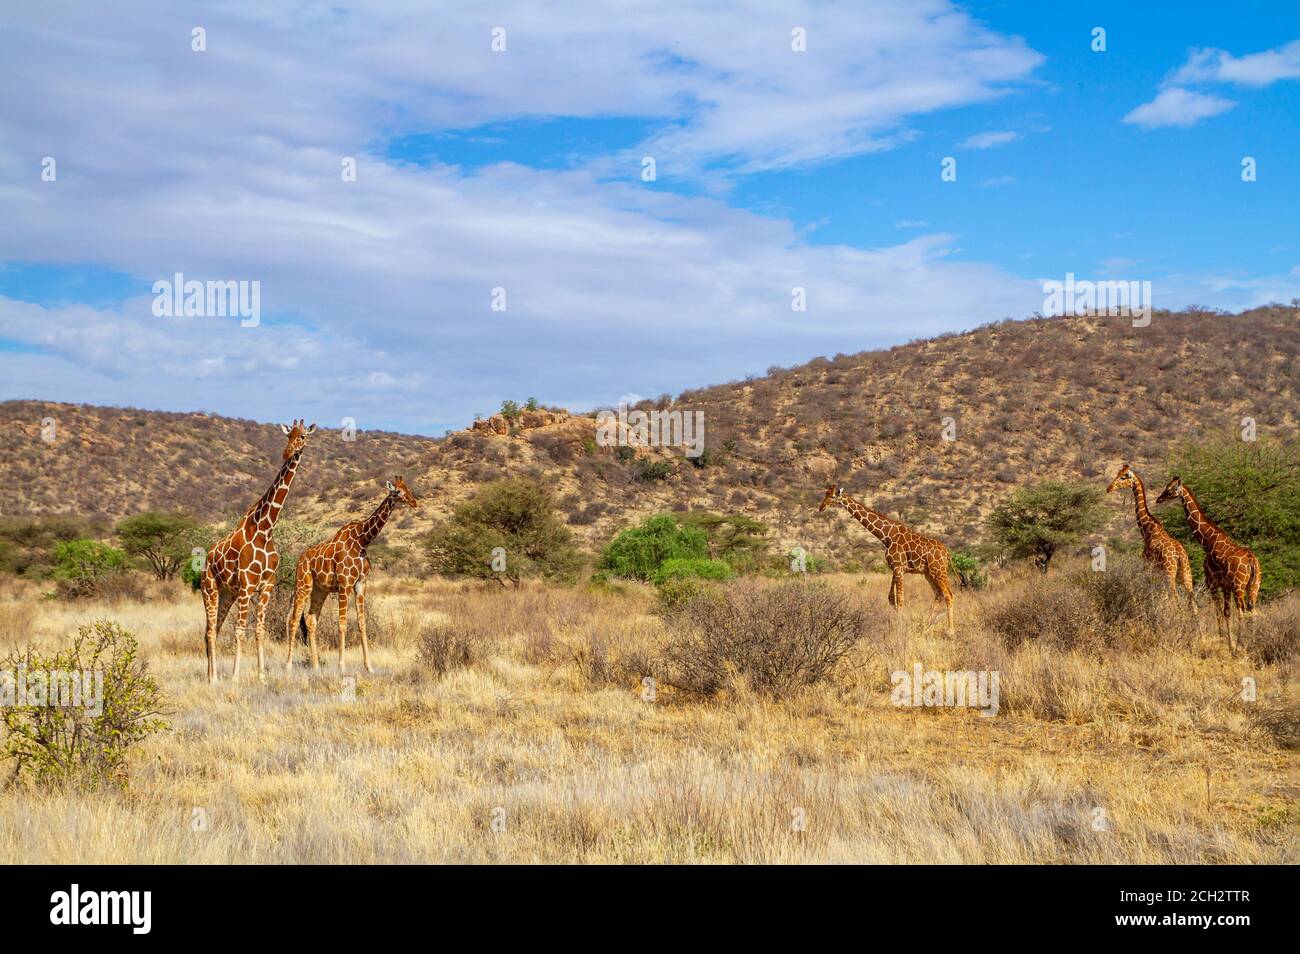 Reticulated giraffe, group of five, in Buffalo Springs National Reserve, Kenya, Africa. Landscape with dry bush. 'Giraffa camelopardalis reticulata' Stock Photo